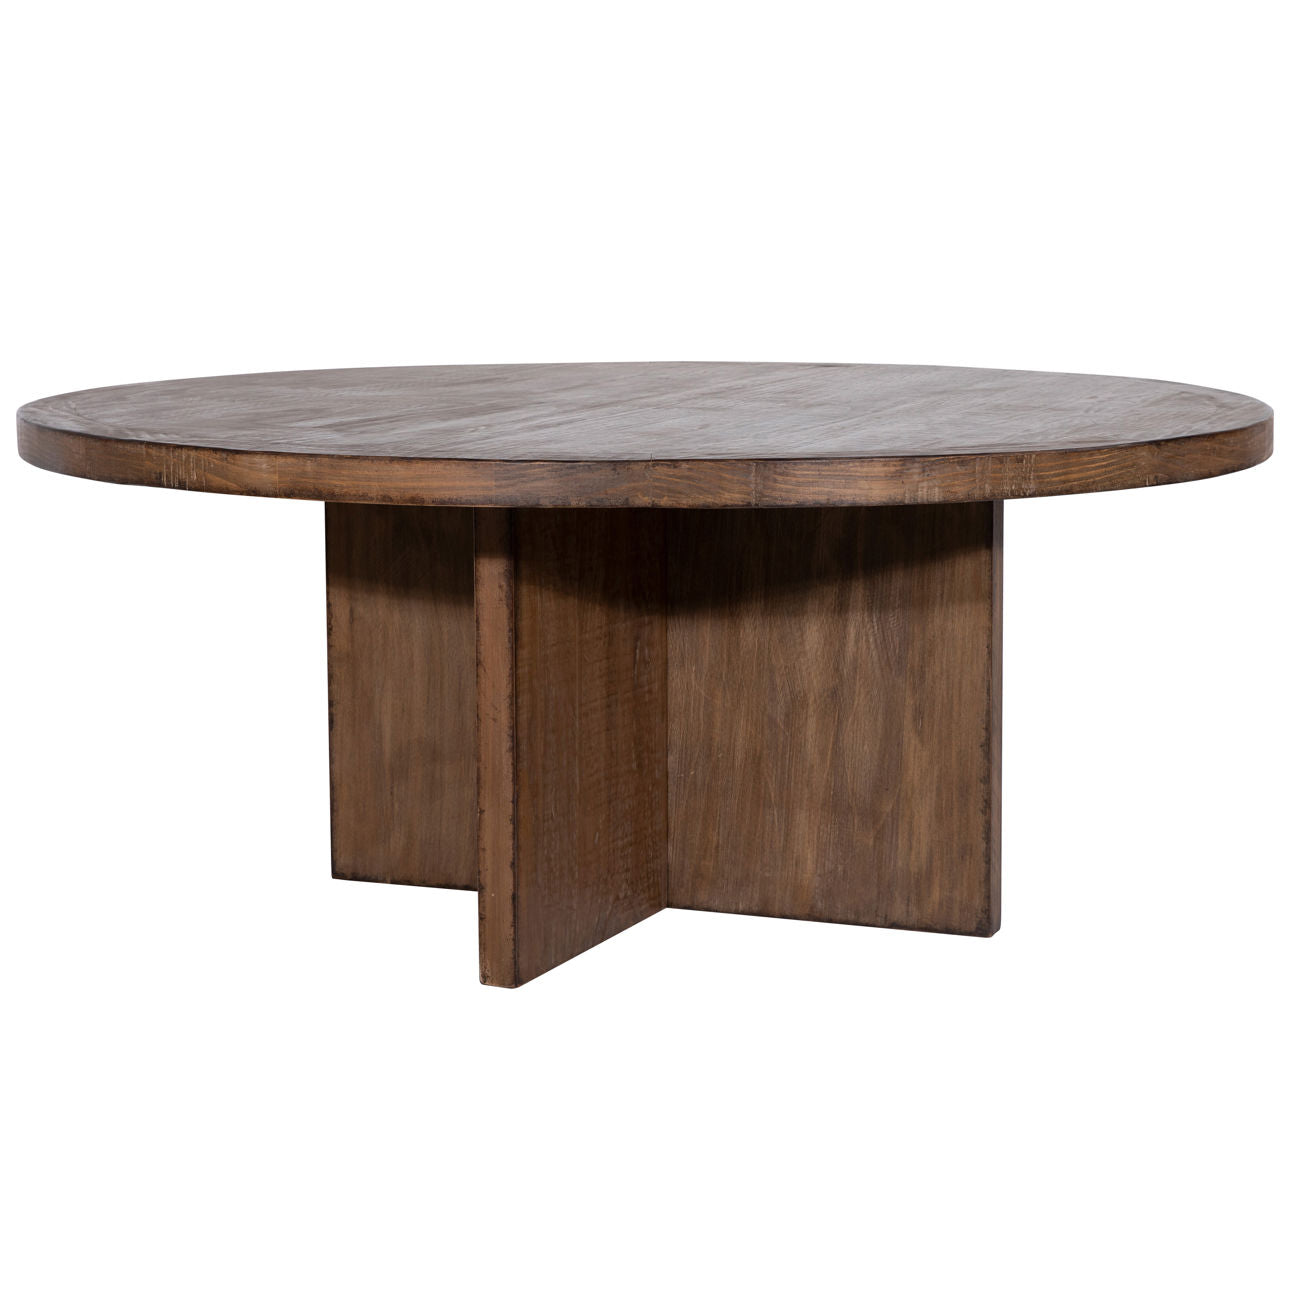 Harley Round Dining Table 60"